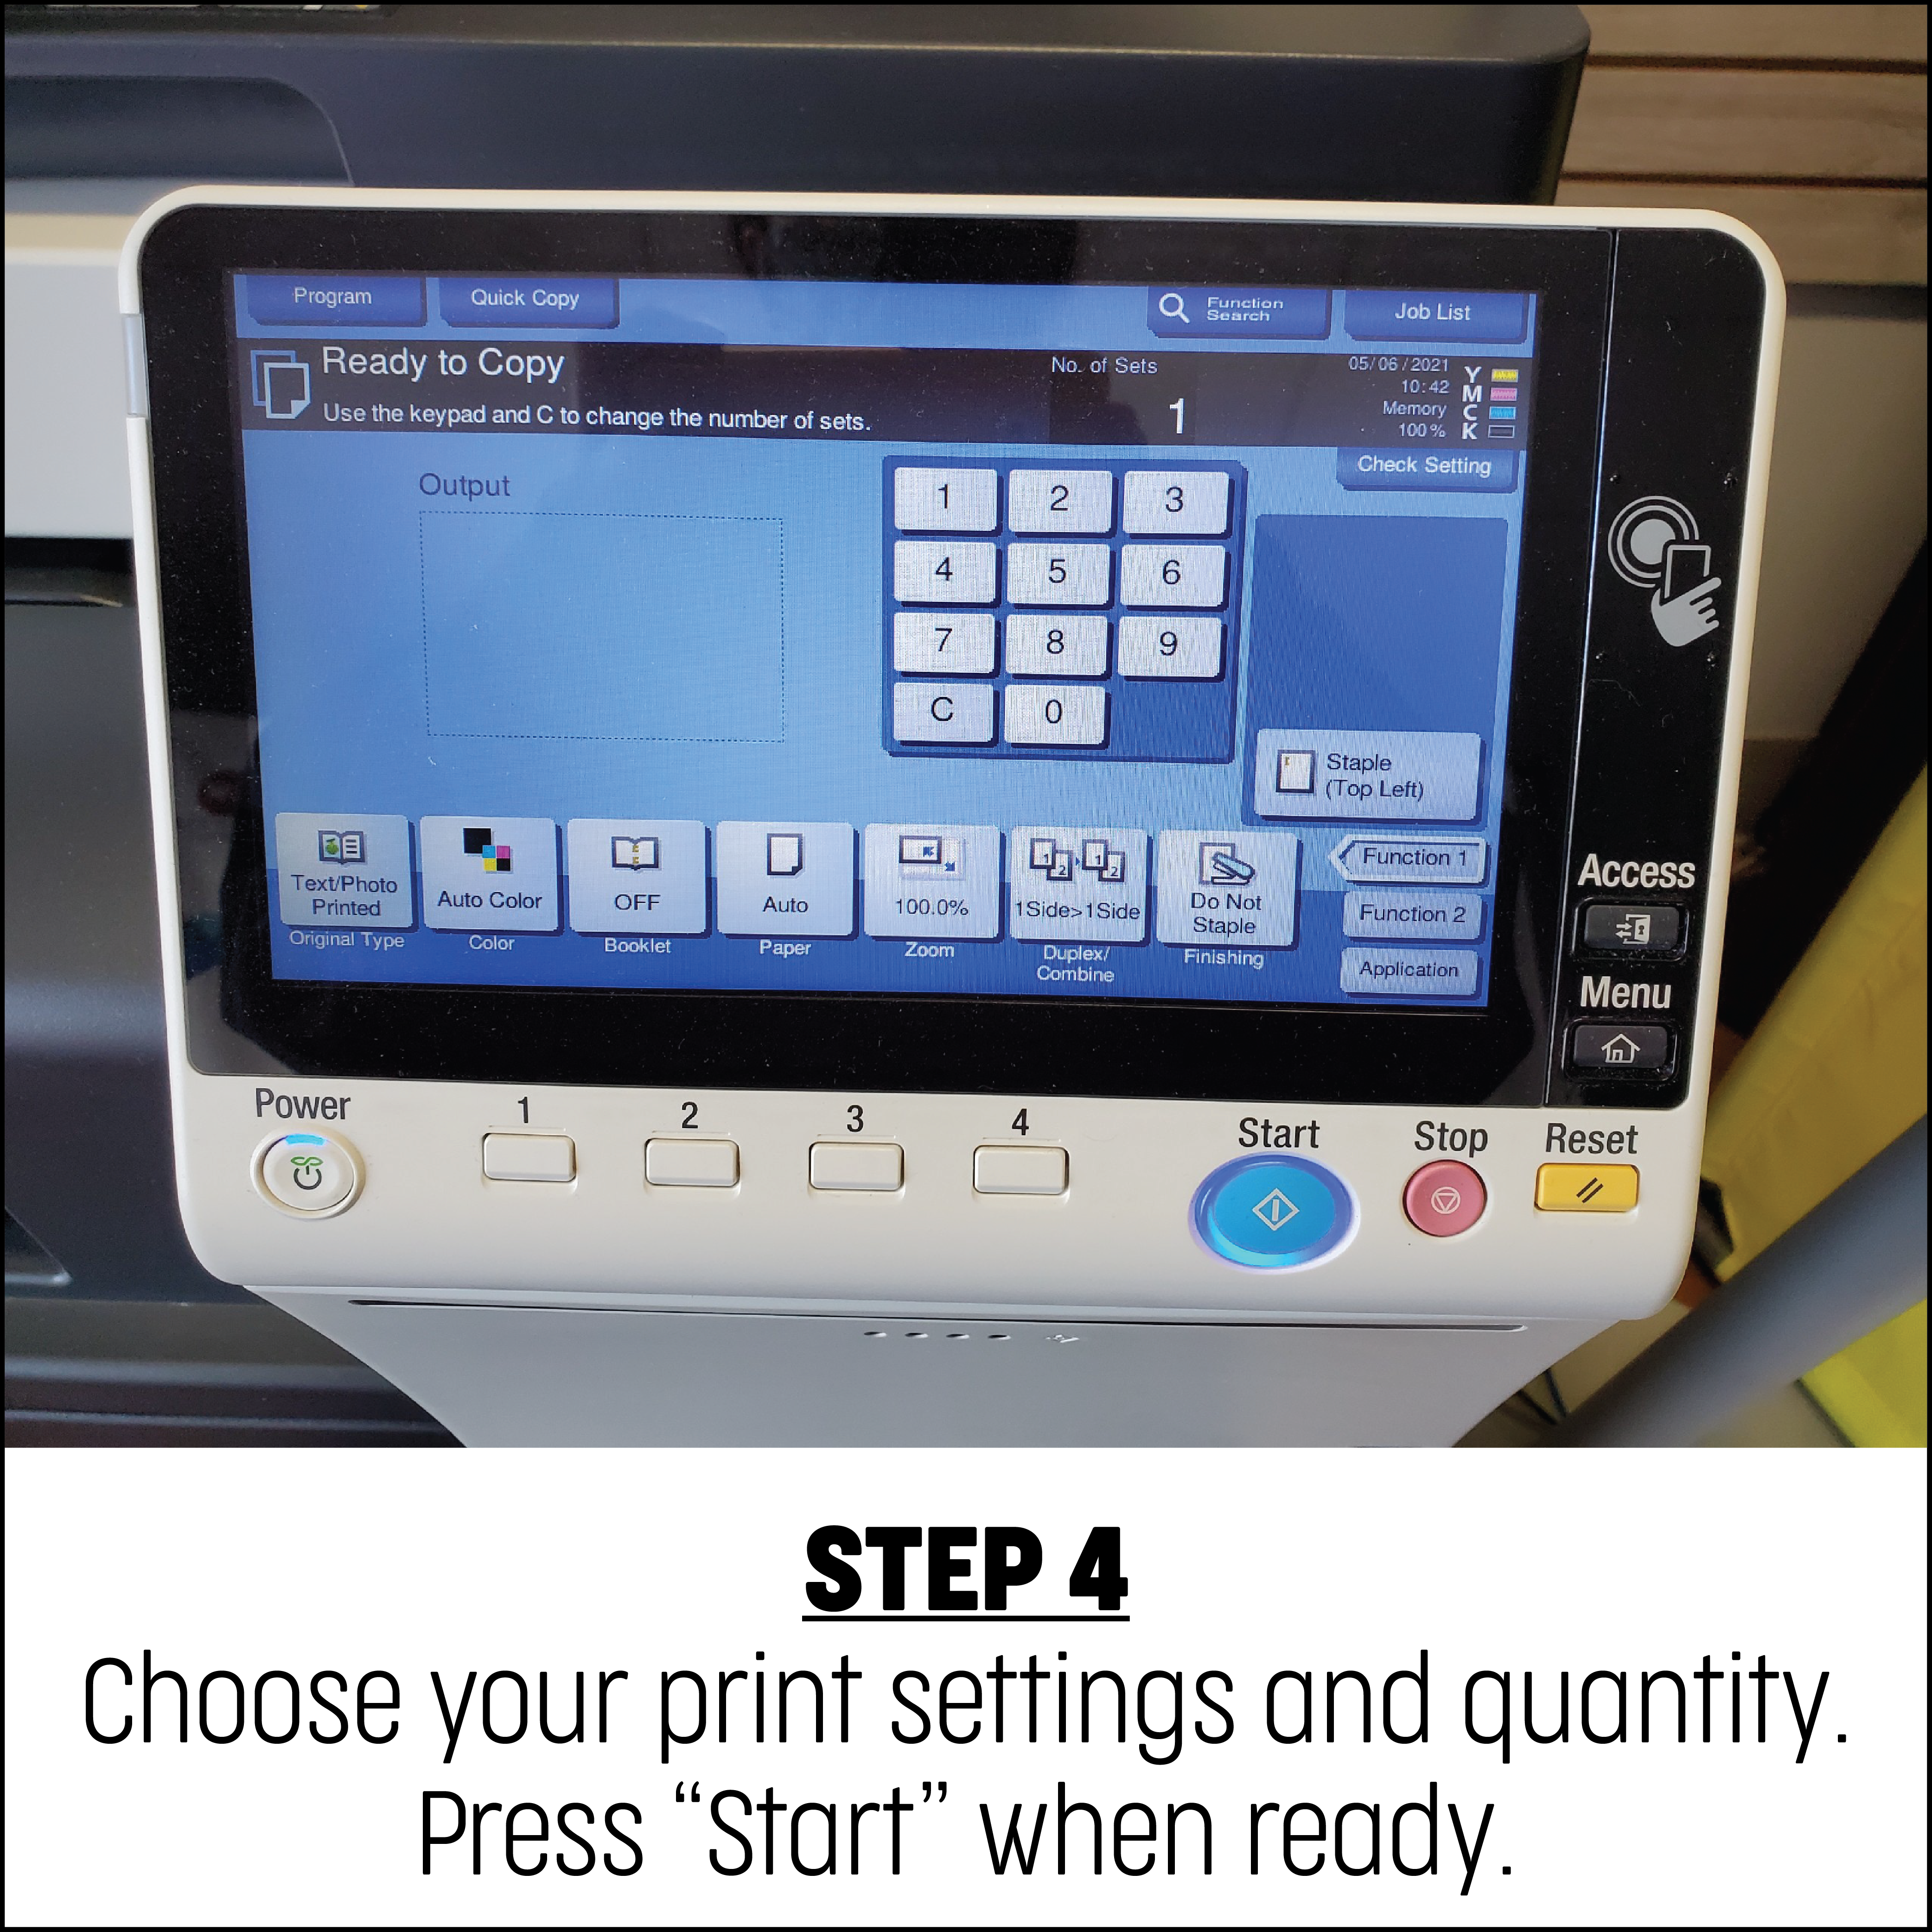 DIY Copying - Step 4: Choose your print settings and quantity. Press "Start" when ready.